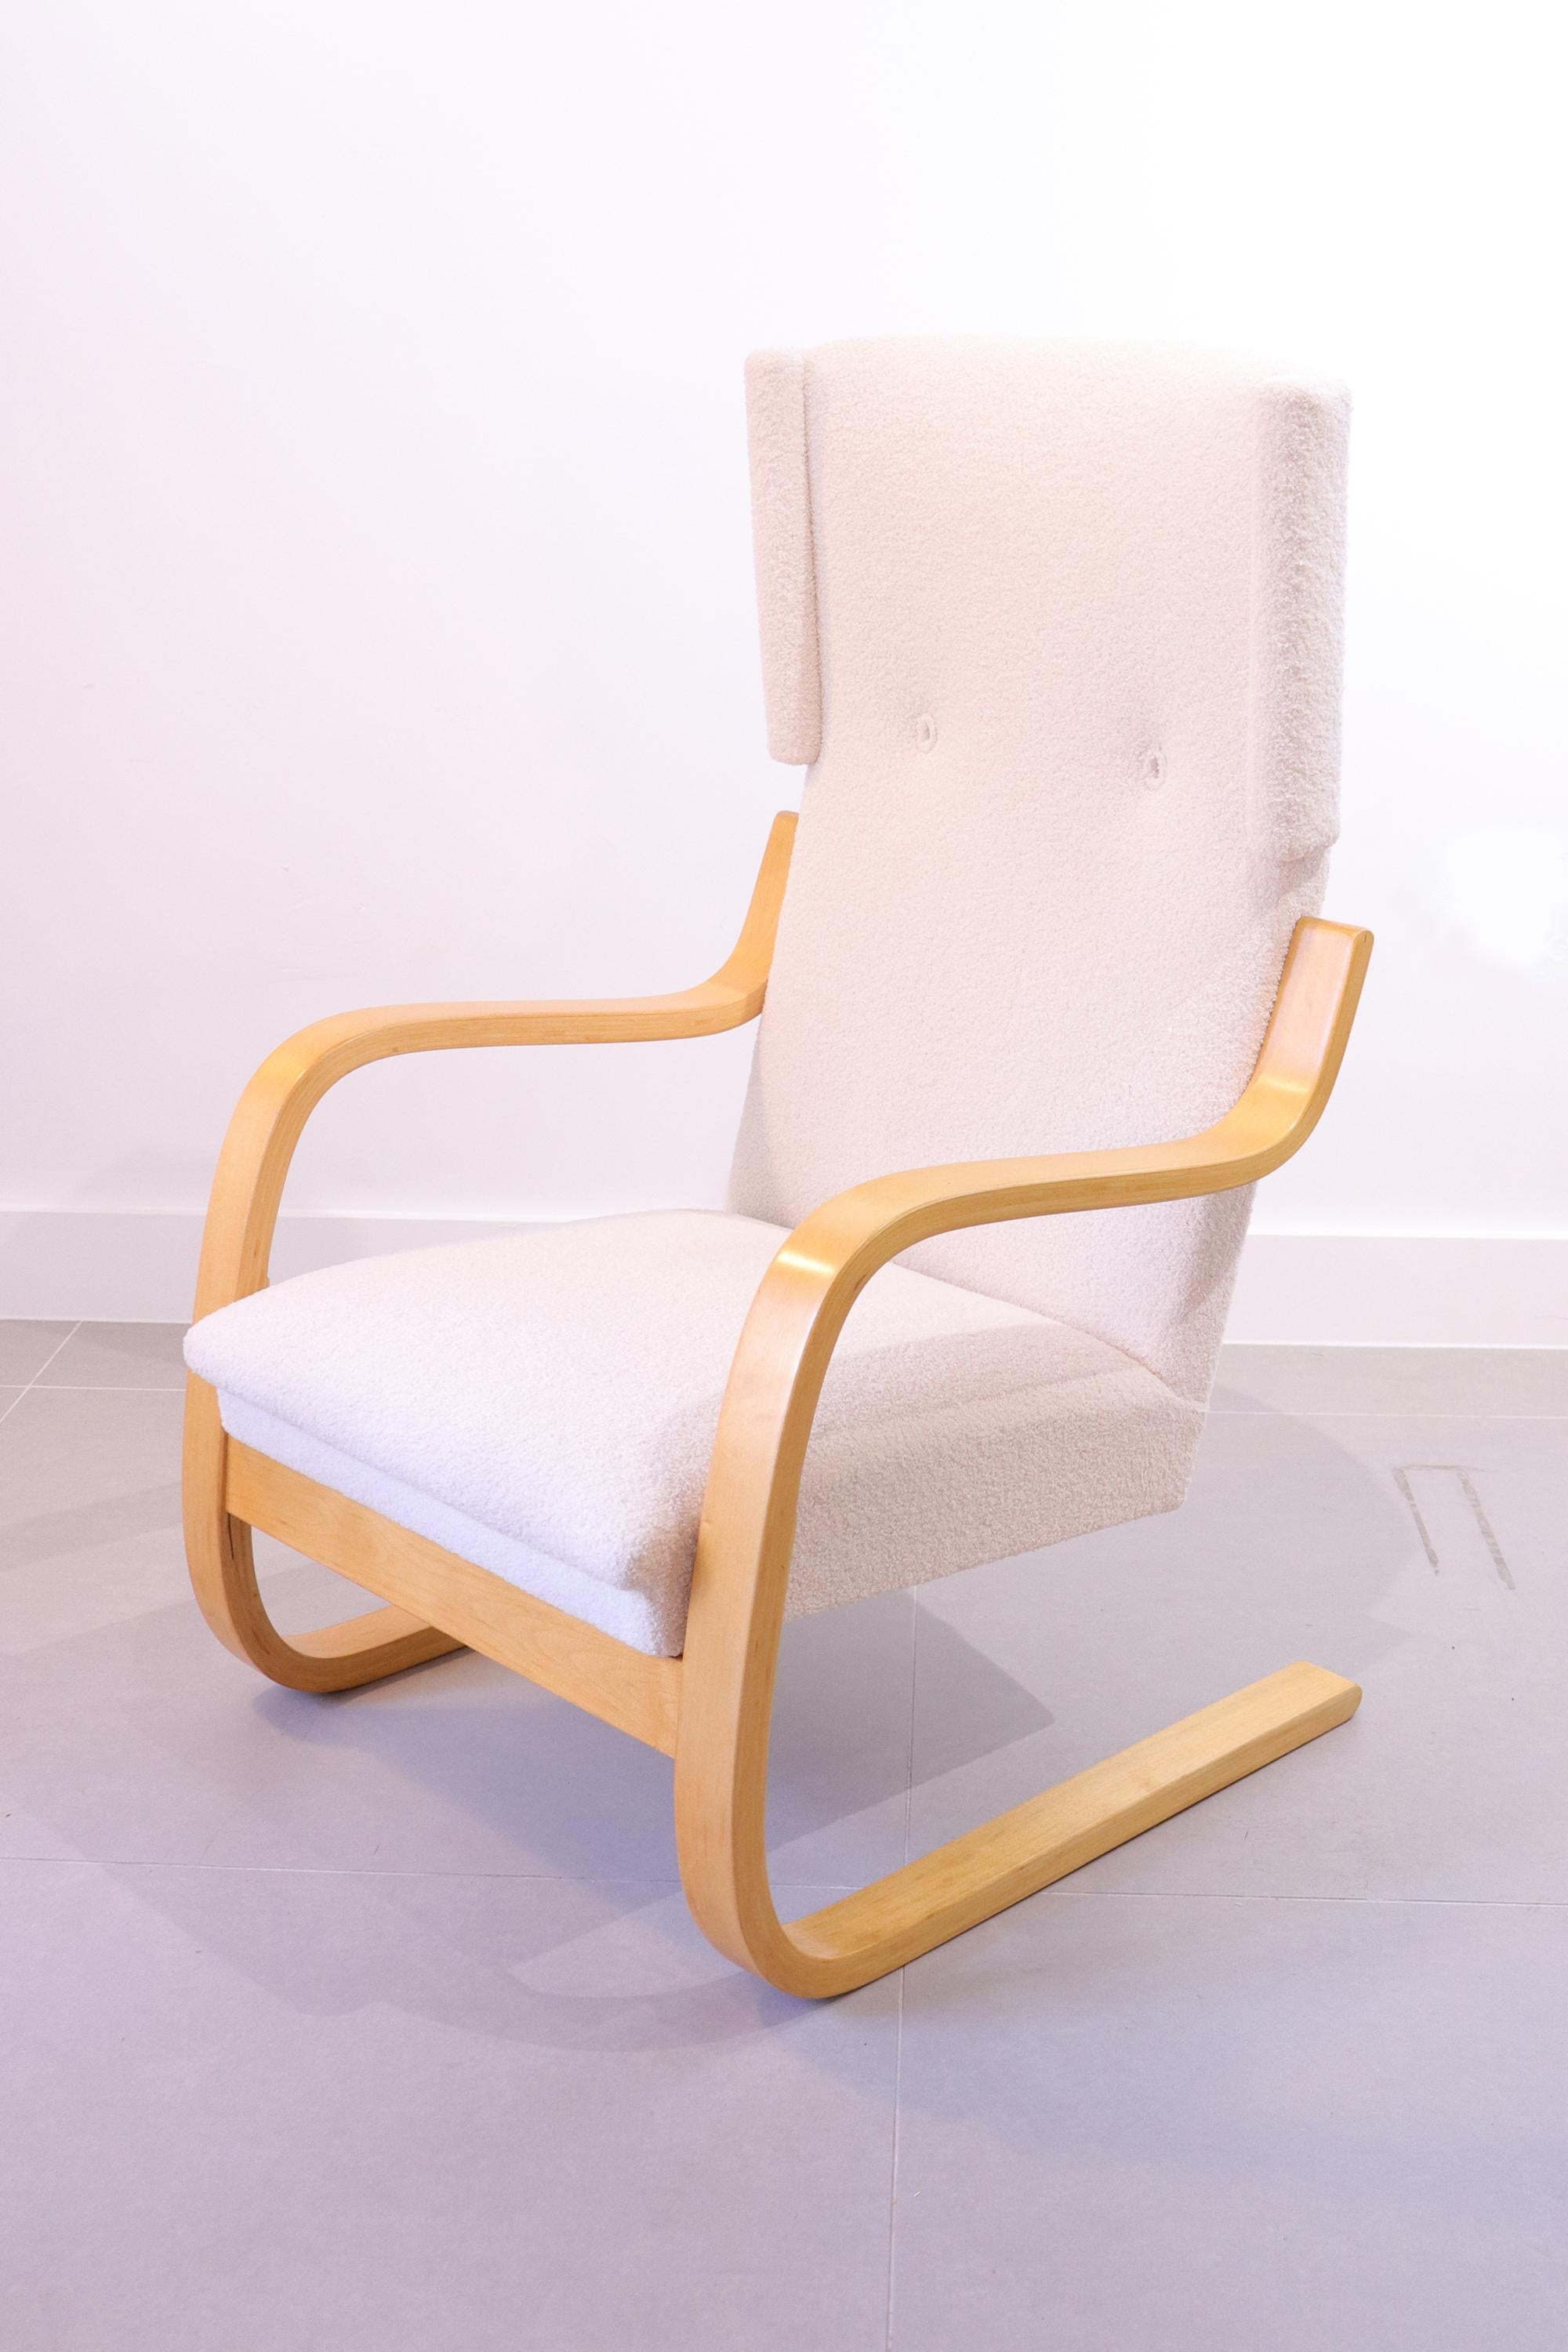 Alvar Aalto 401 wingback chair by Artek Finland, 1970s.
Bent birch and plywood frame, recently reupholstered in a high quality cream boucle.

About the designer: 
As one of the key figures of Mid-Century Modernism and perhaps Finland's most